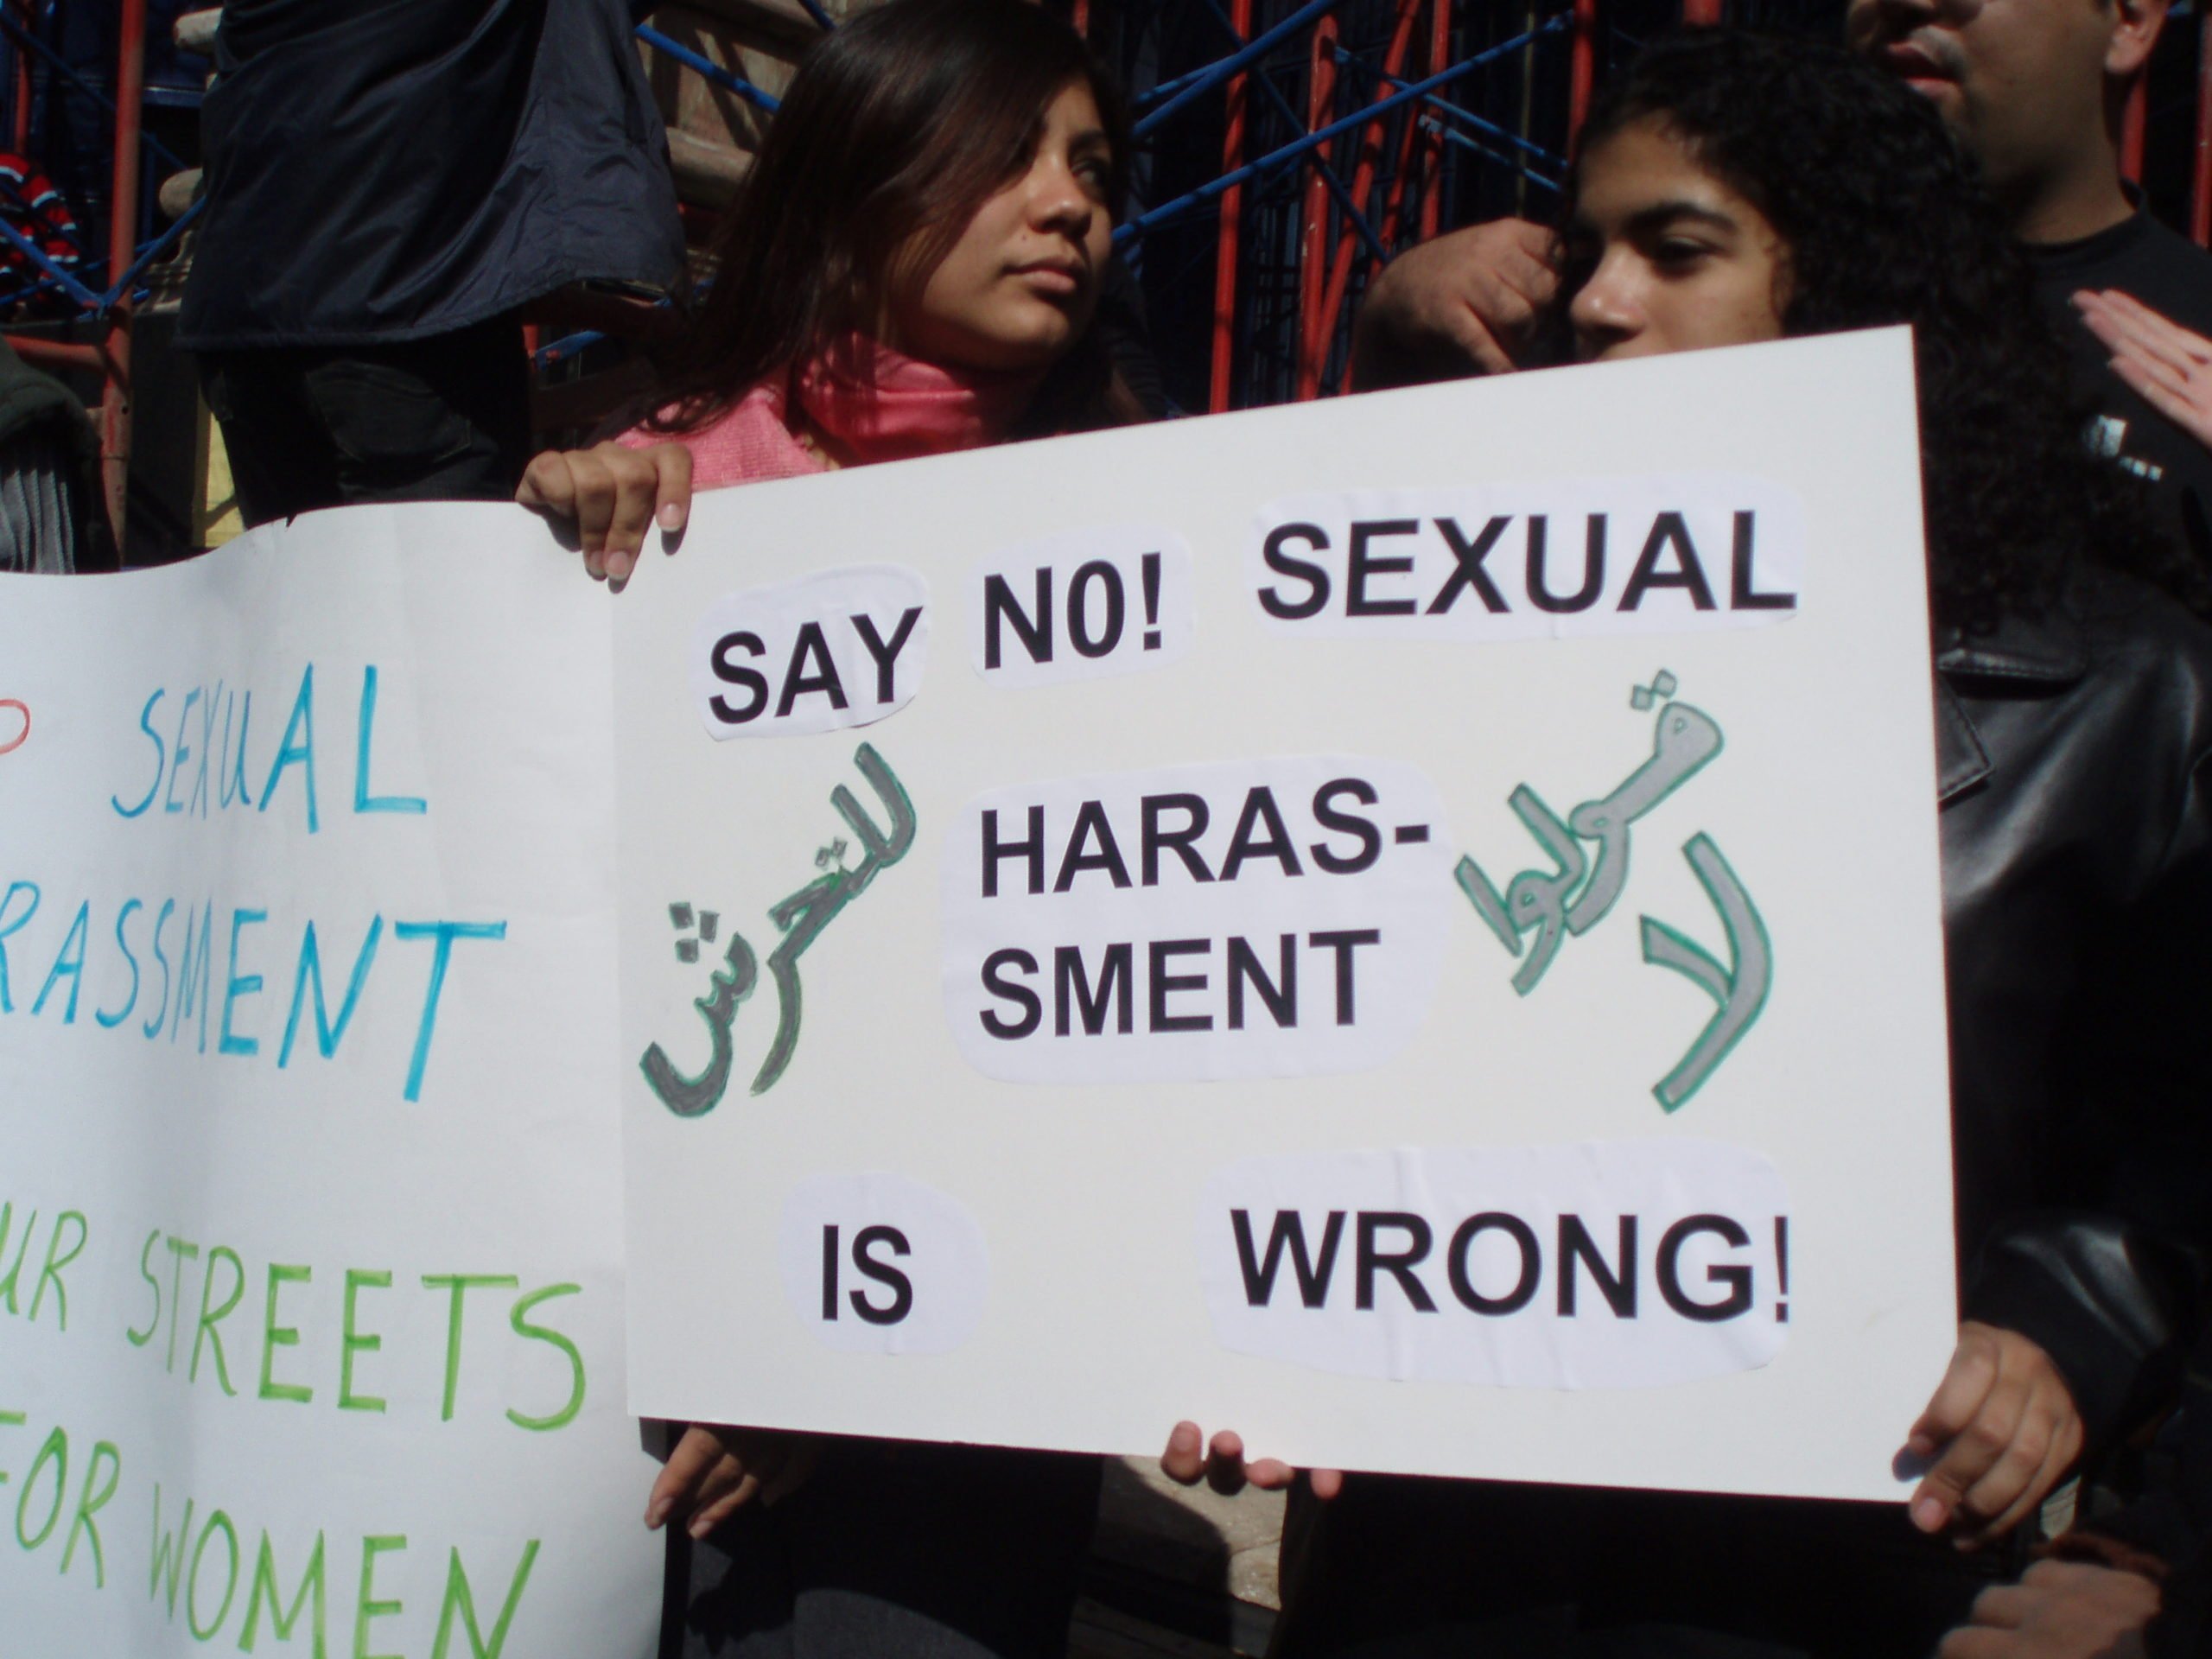 Say no to sexual harasment